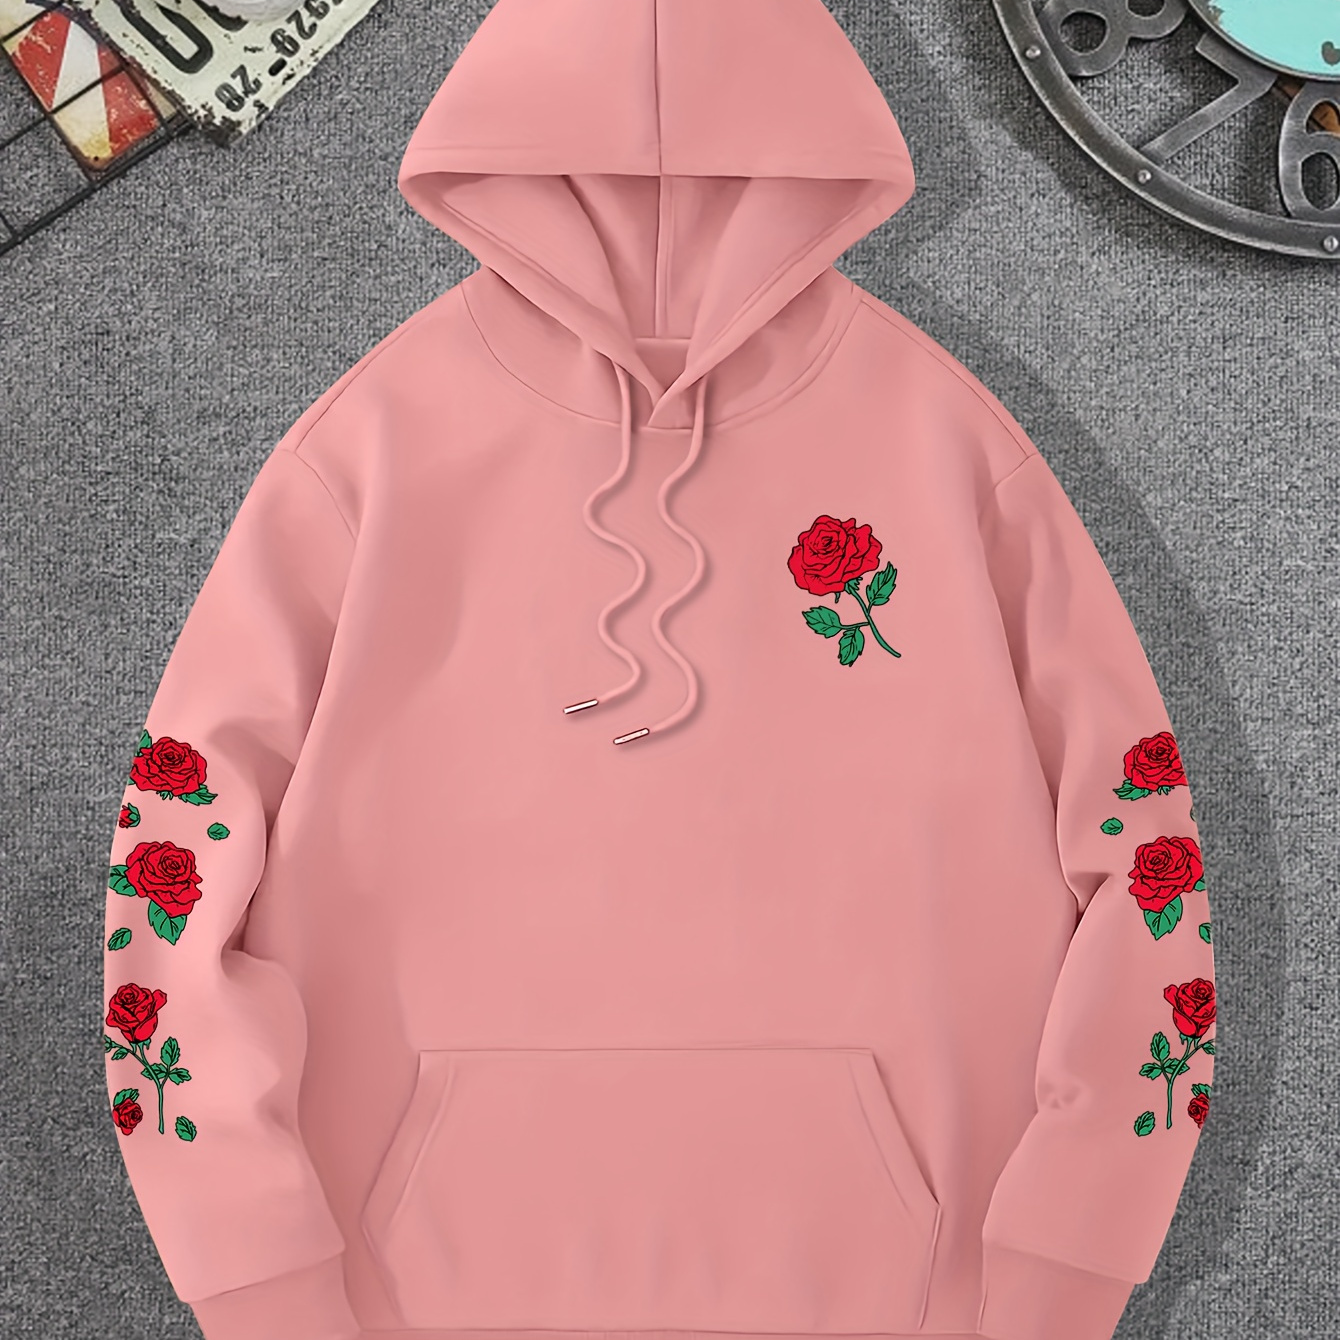 

Retro Rose Pattern Print Hoodie, Cool Hoodies For Men, Men's Casual Graphic Design Pullover Hooded Sweatshirt With Kangaroo Pocket Streetwear For Winter Fall, As Gifts